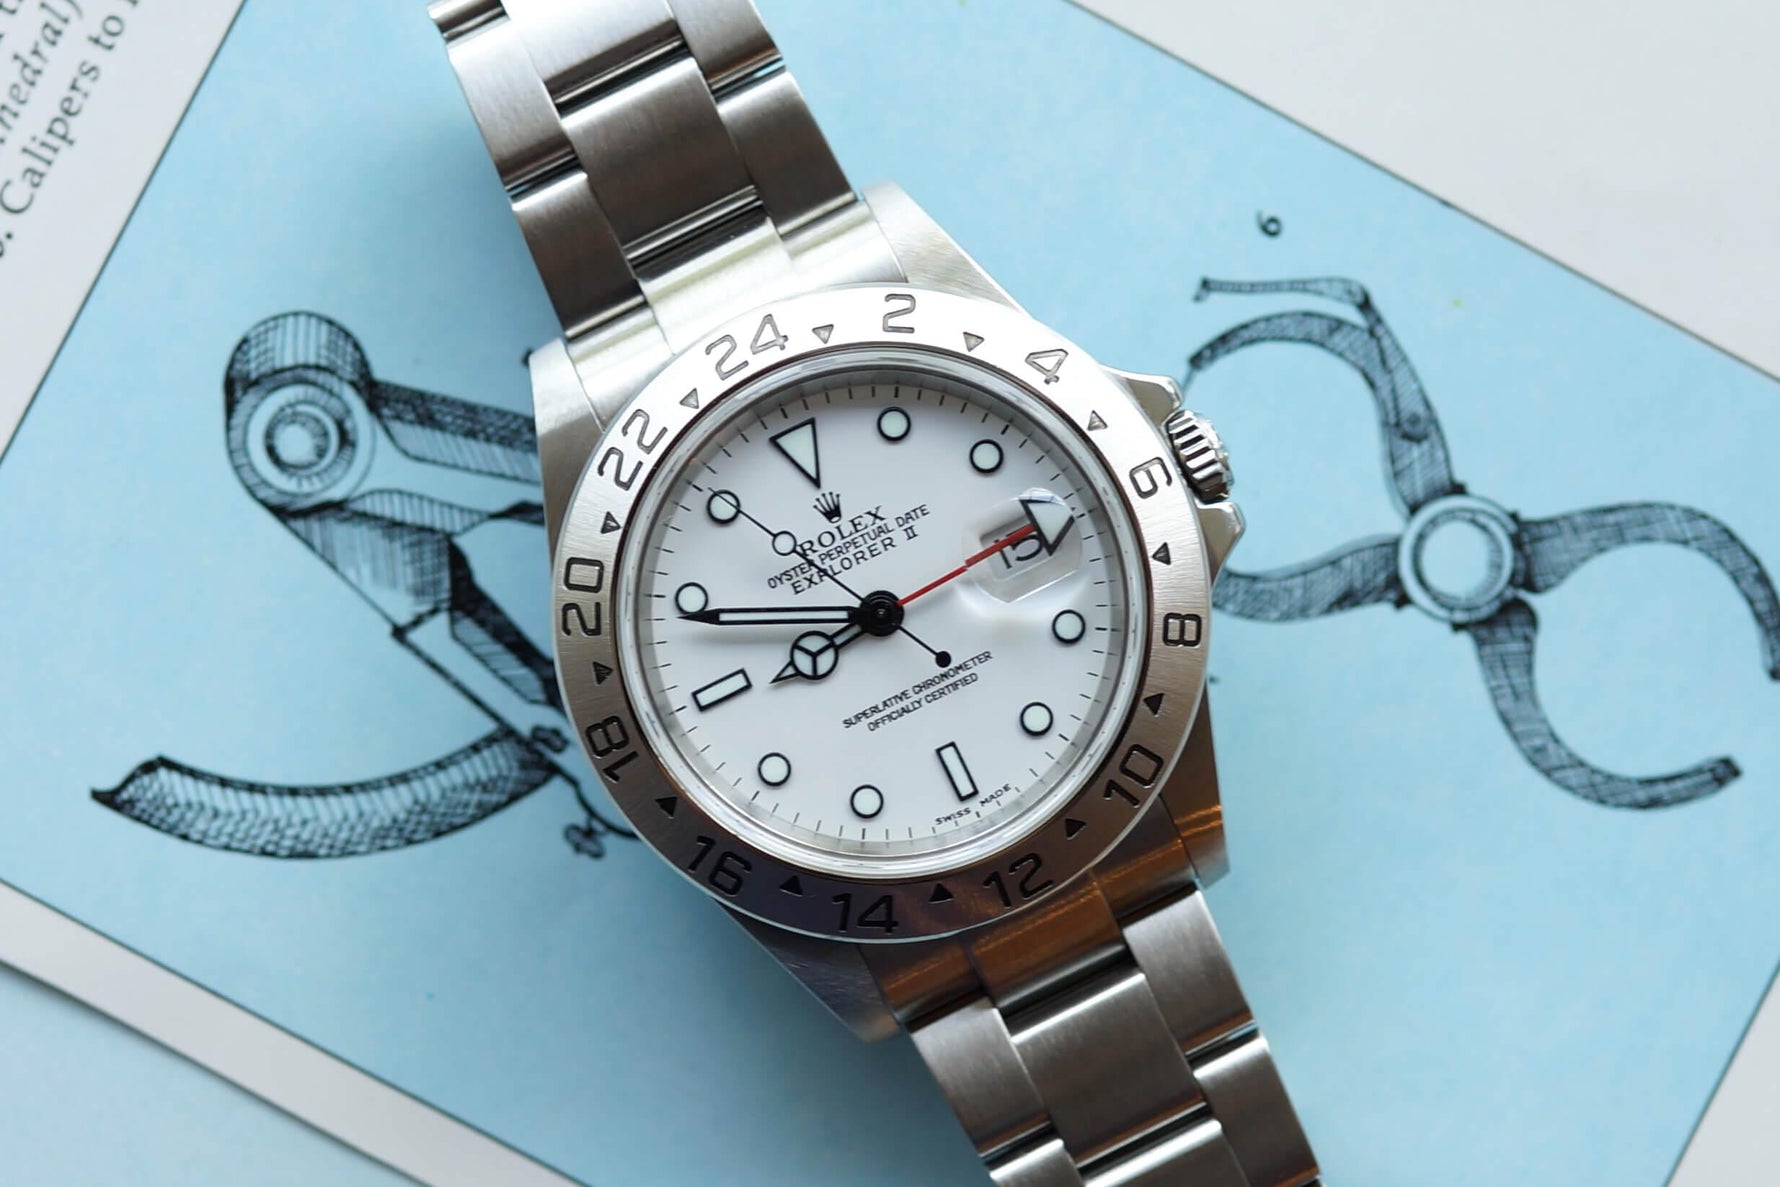 SOLDOUT: Rolex 16570 GMT POLAR New Old Stock - WearingTime Luxury Watches